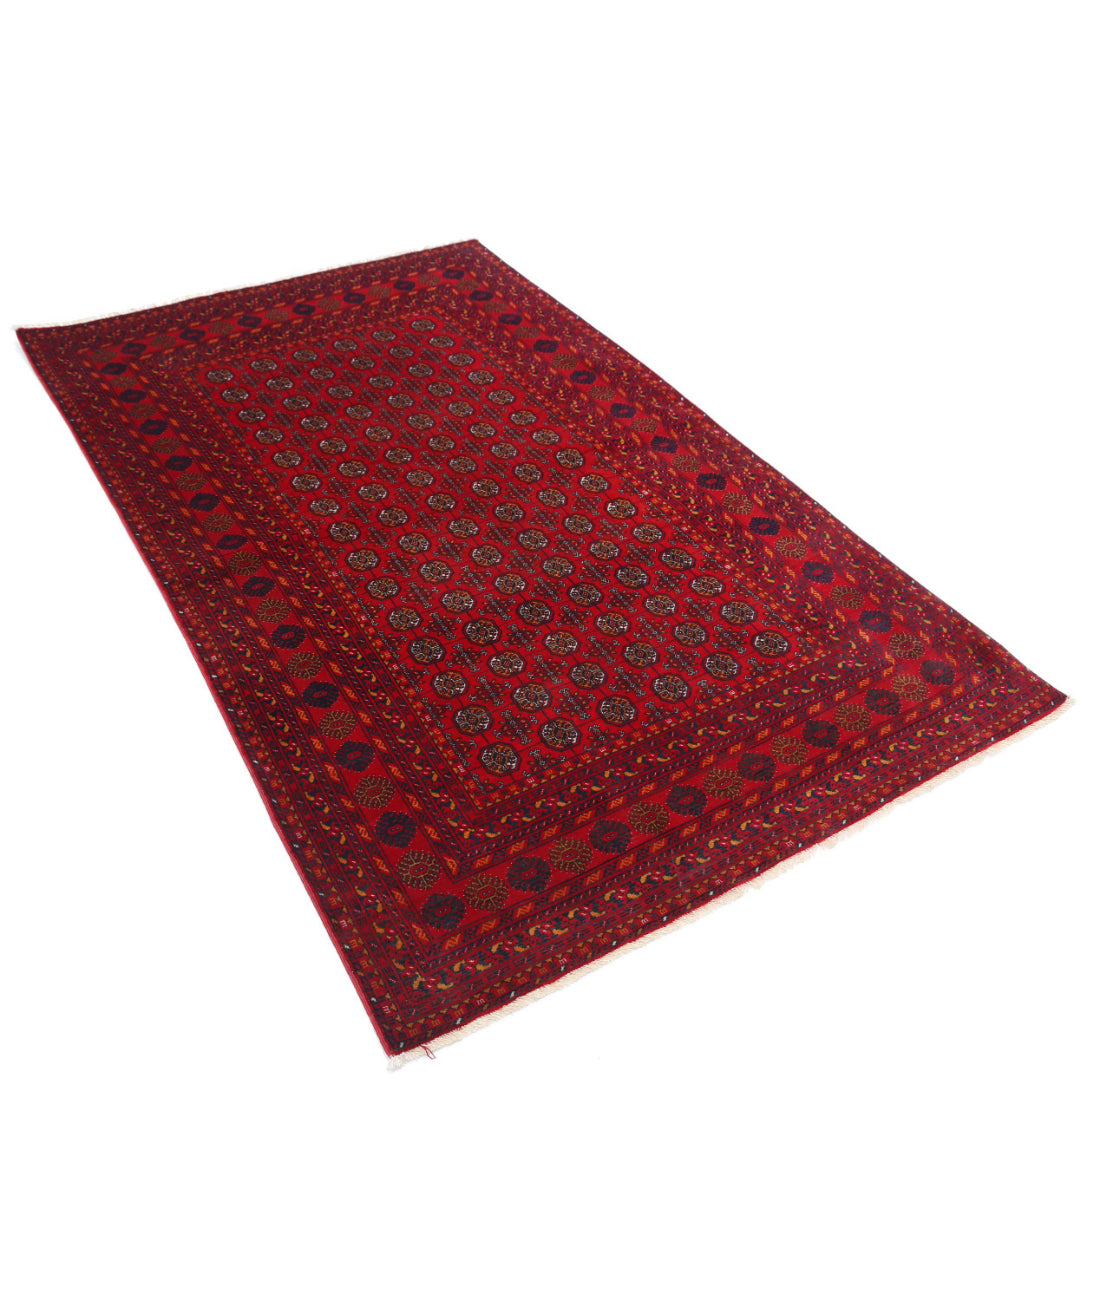 Hand Knotted Afghan Beljik Wool Rug - 3'11'' x 6'6'' 3'11'' x 6'6'' (118 X 195) / Red / Ivory